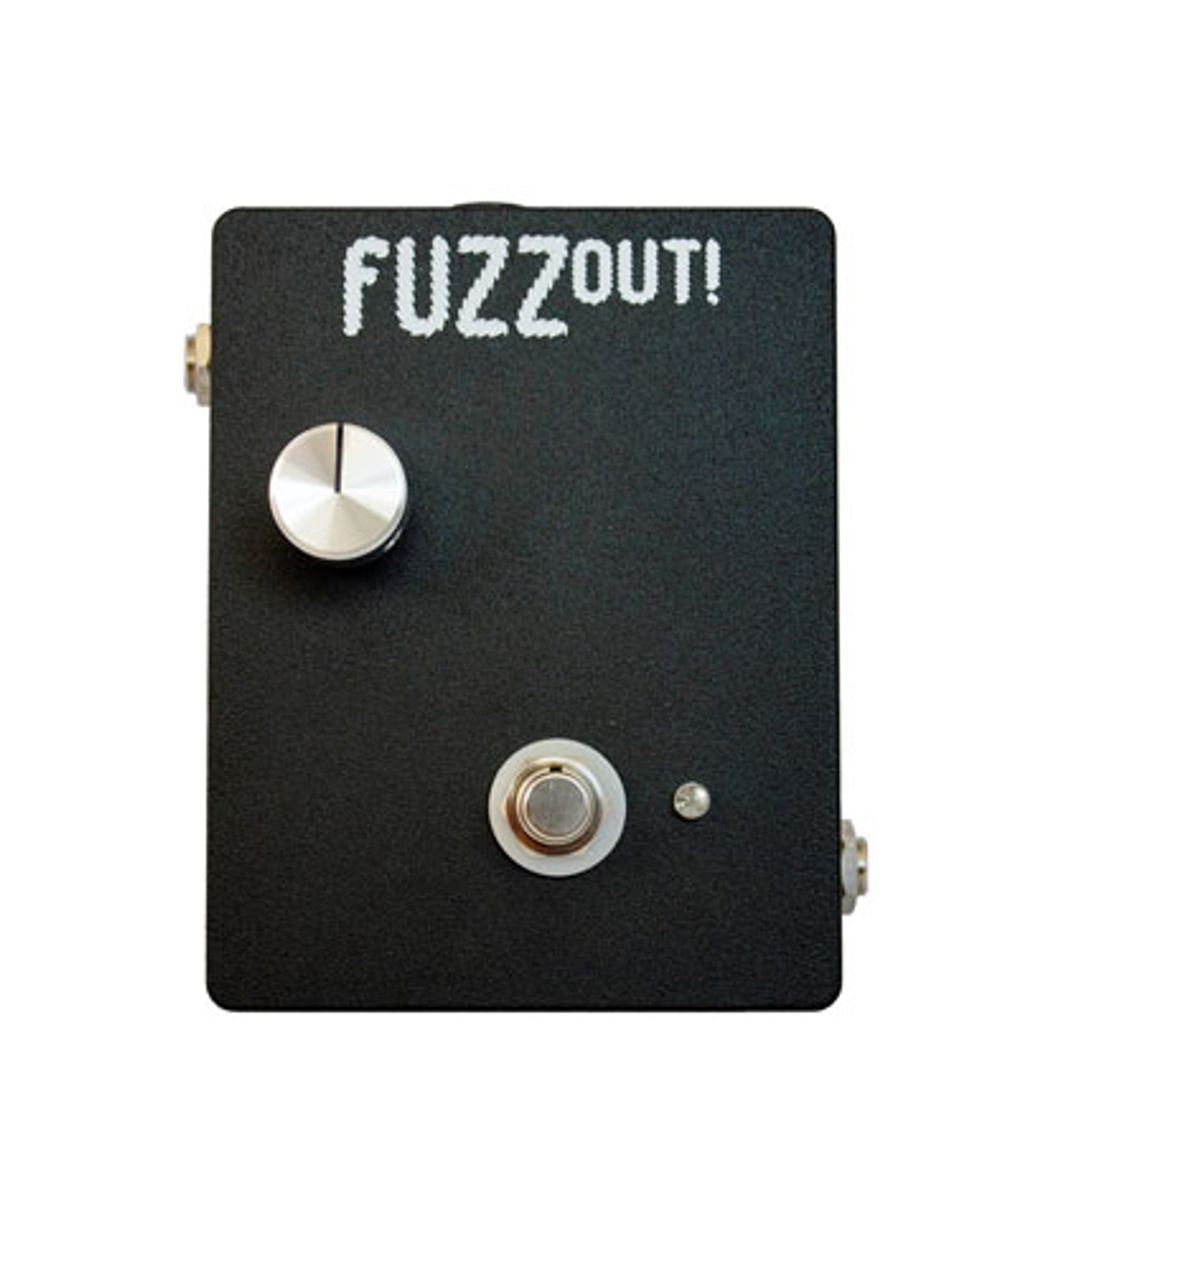 Ohm Made Electronics Announces the Fuzz Out!